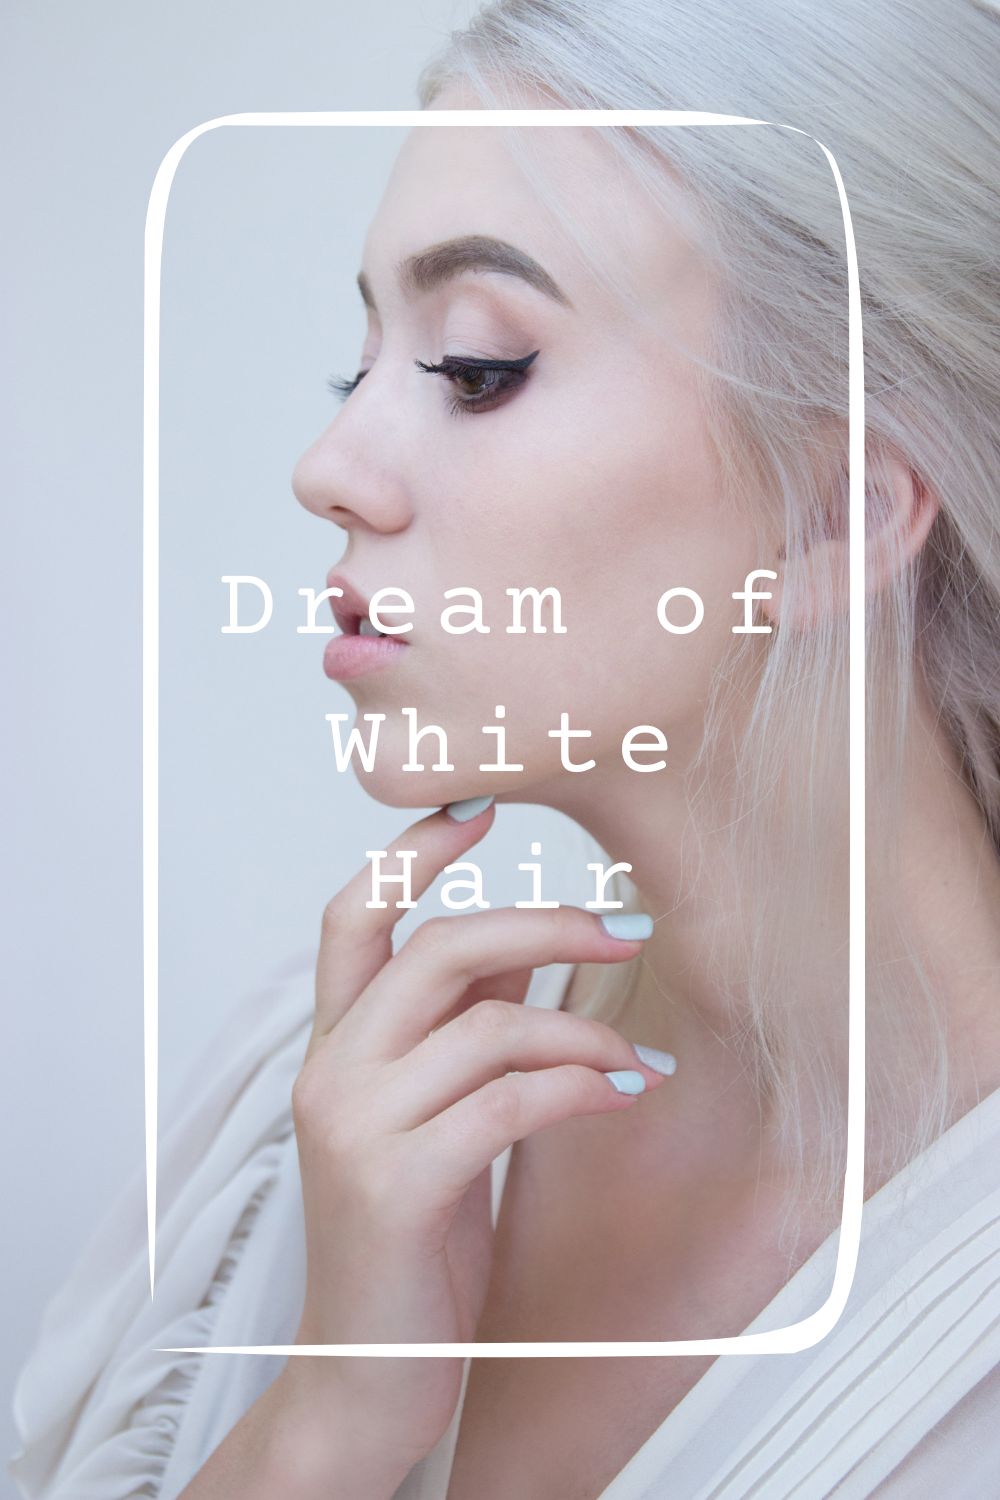 9 Dream of White Hair Meanings1